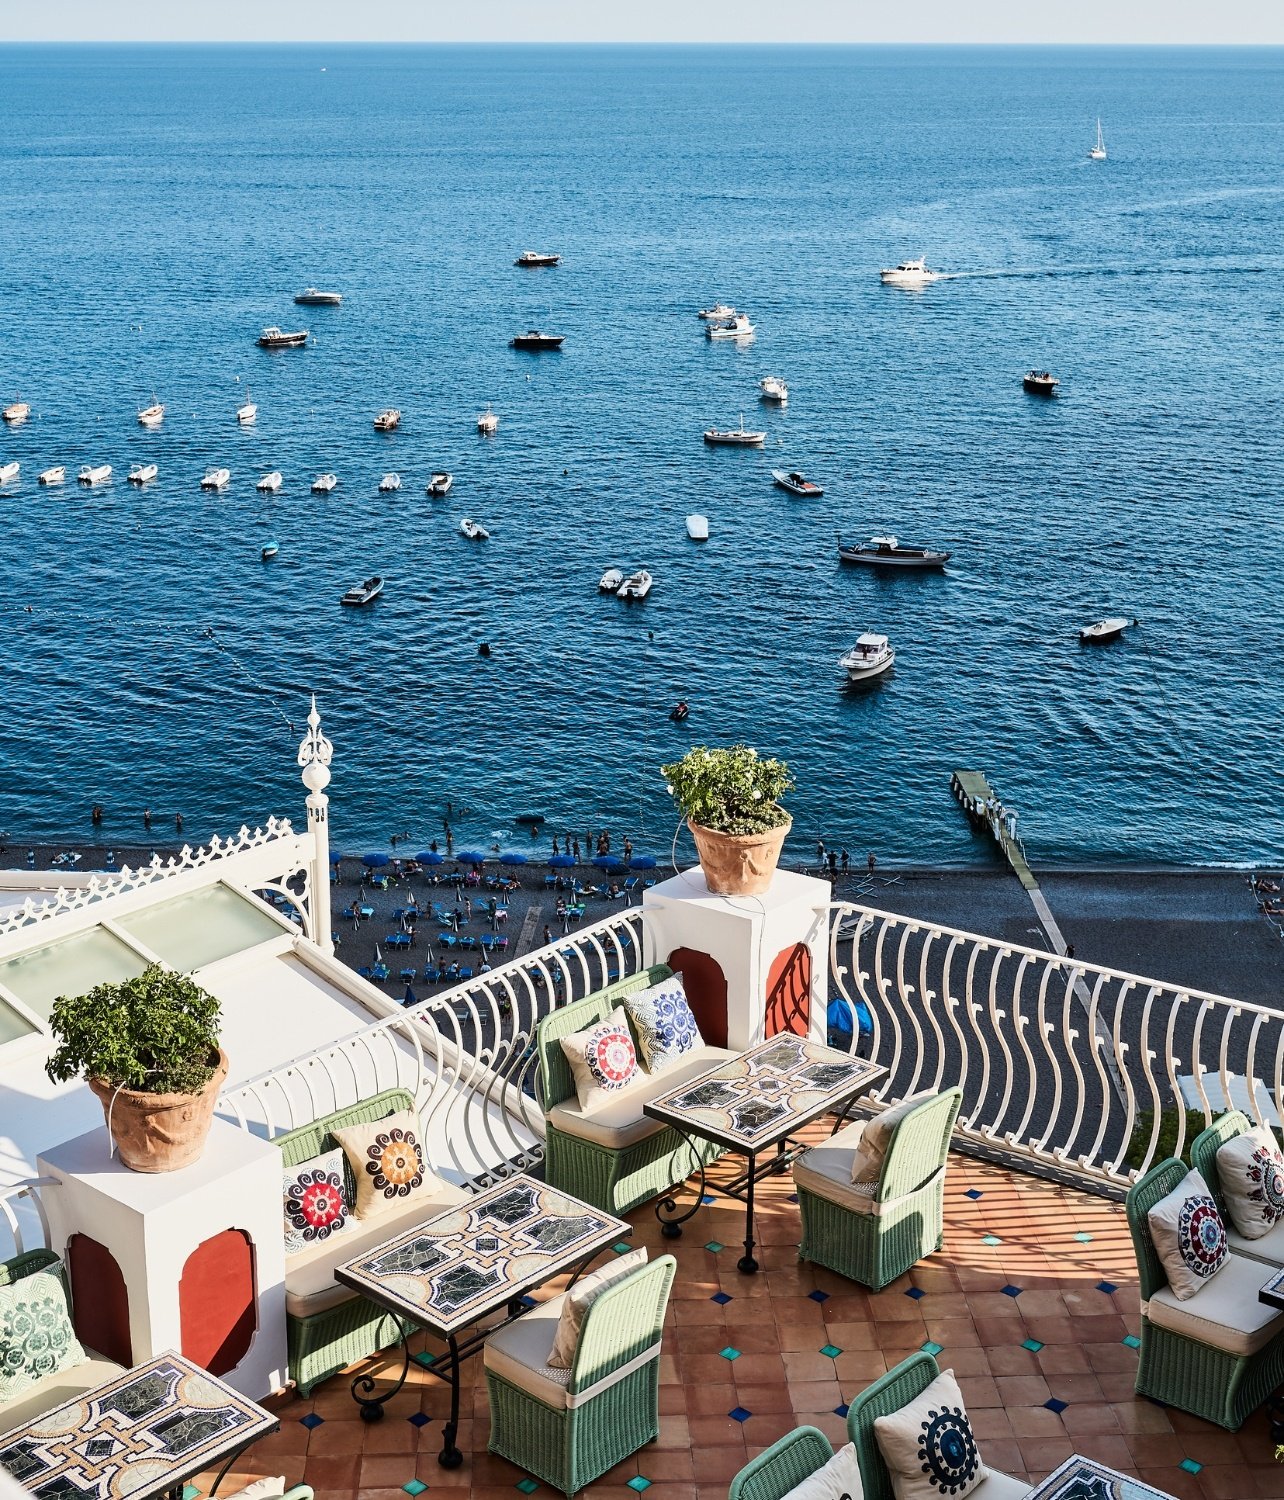 View of boats in Positano from the restaurant balcony at the Sirenuse hotel